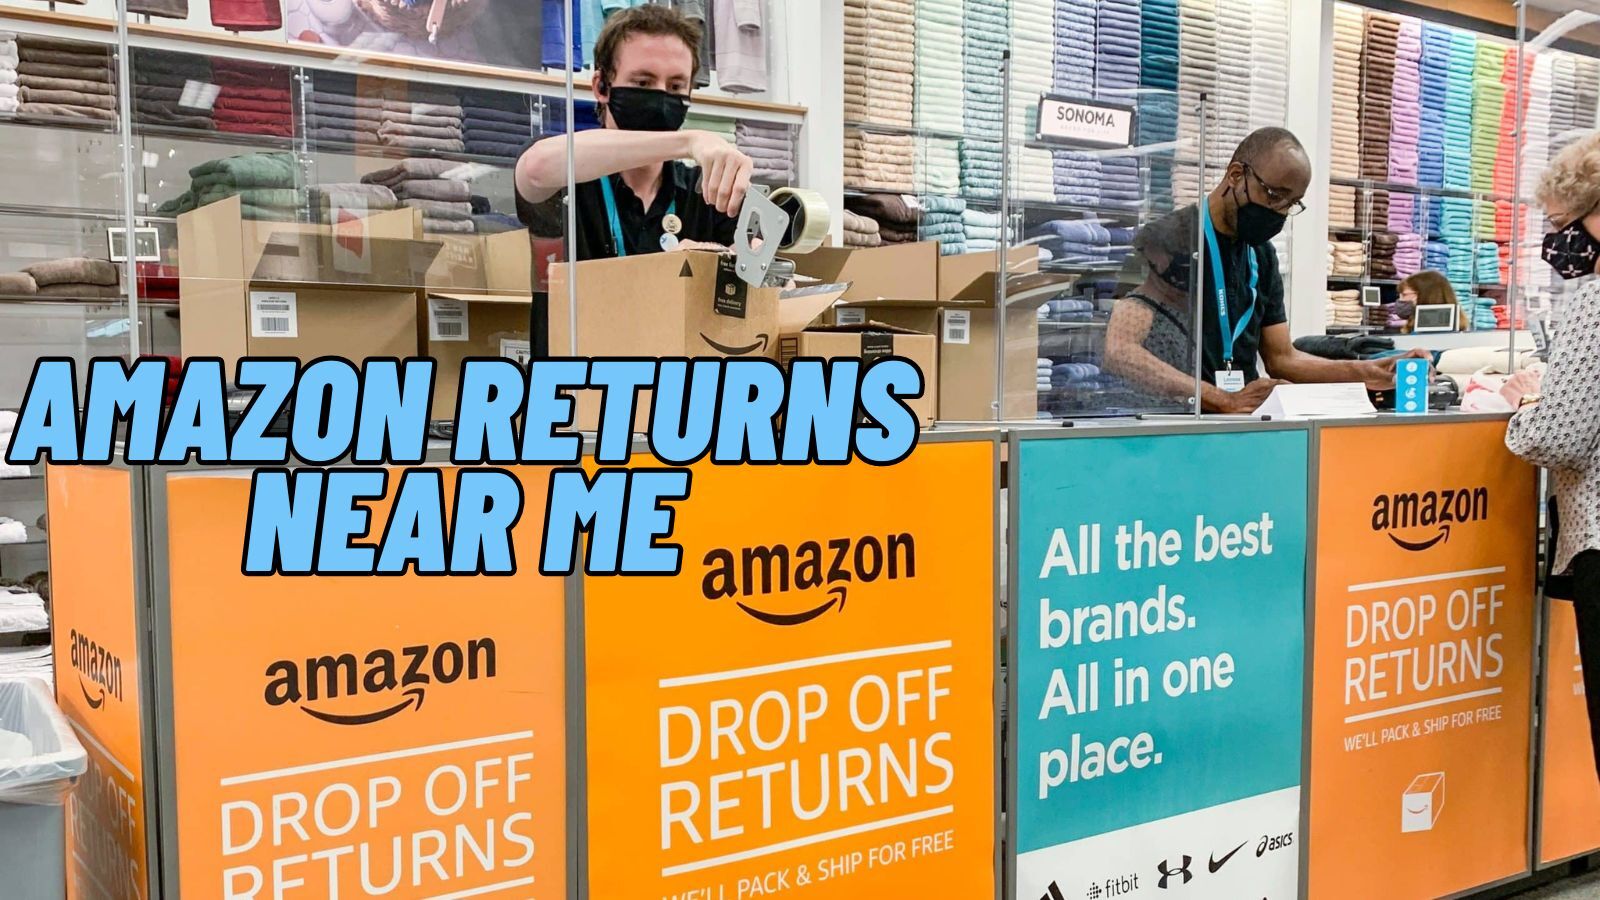 Amazon Returns Near Me - Easy and Convenient Drop-Off Points!